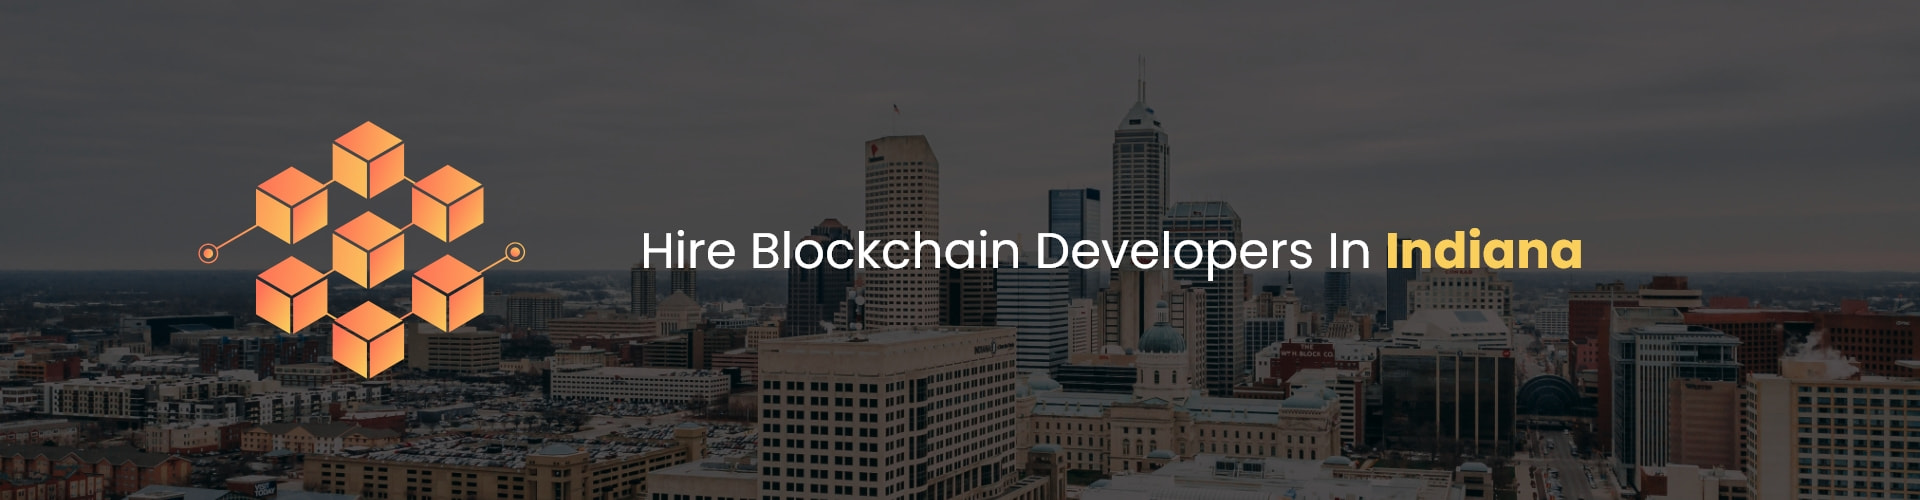 hire blockchain developers in indiana